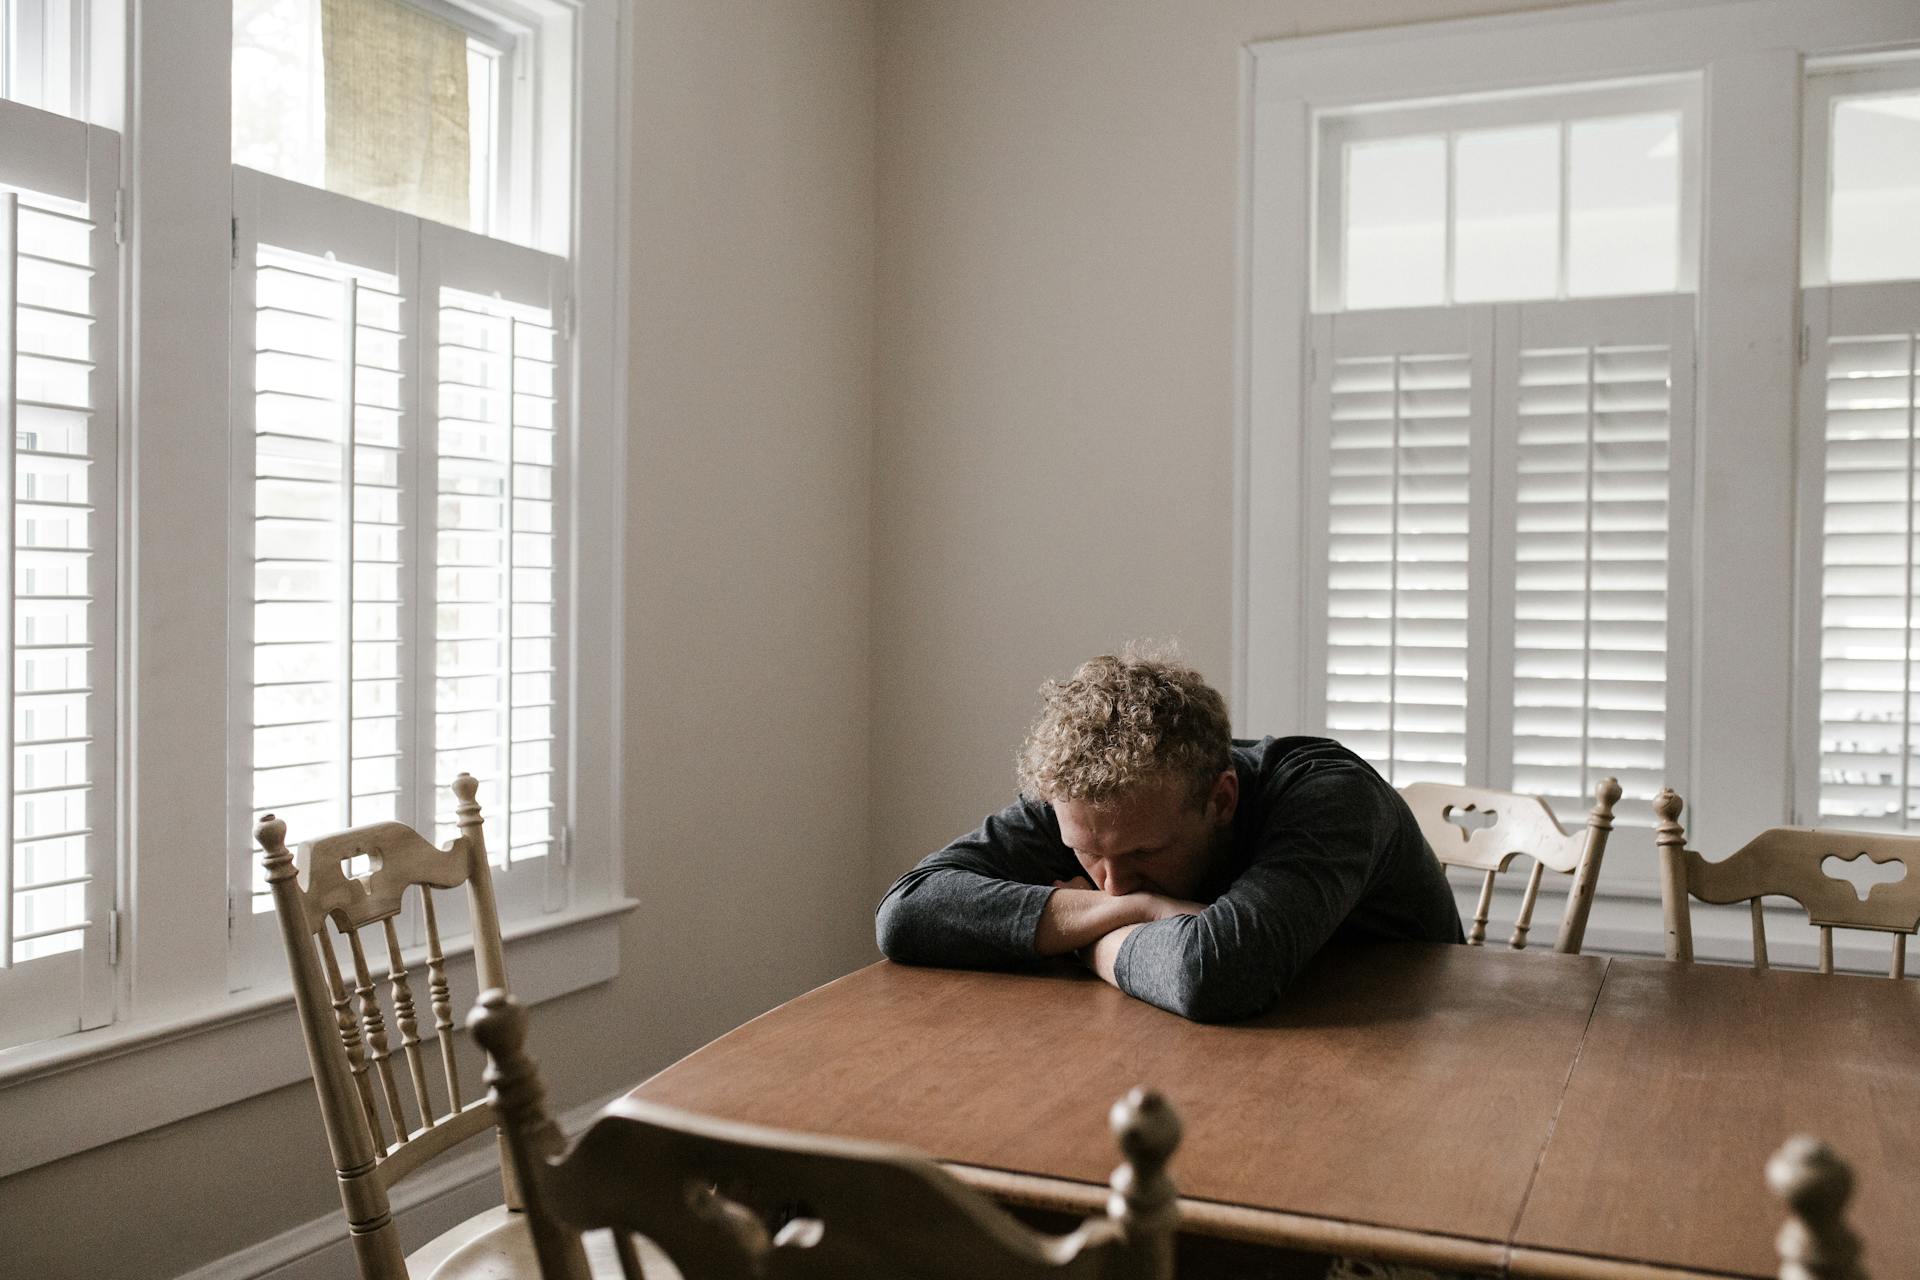 Man resting his head on his arms at his kitchen table | Source: Pexels